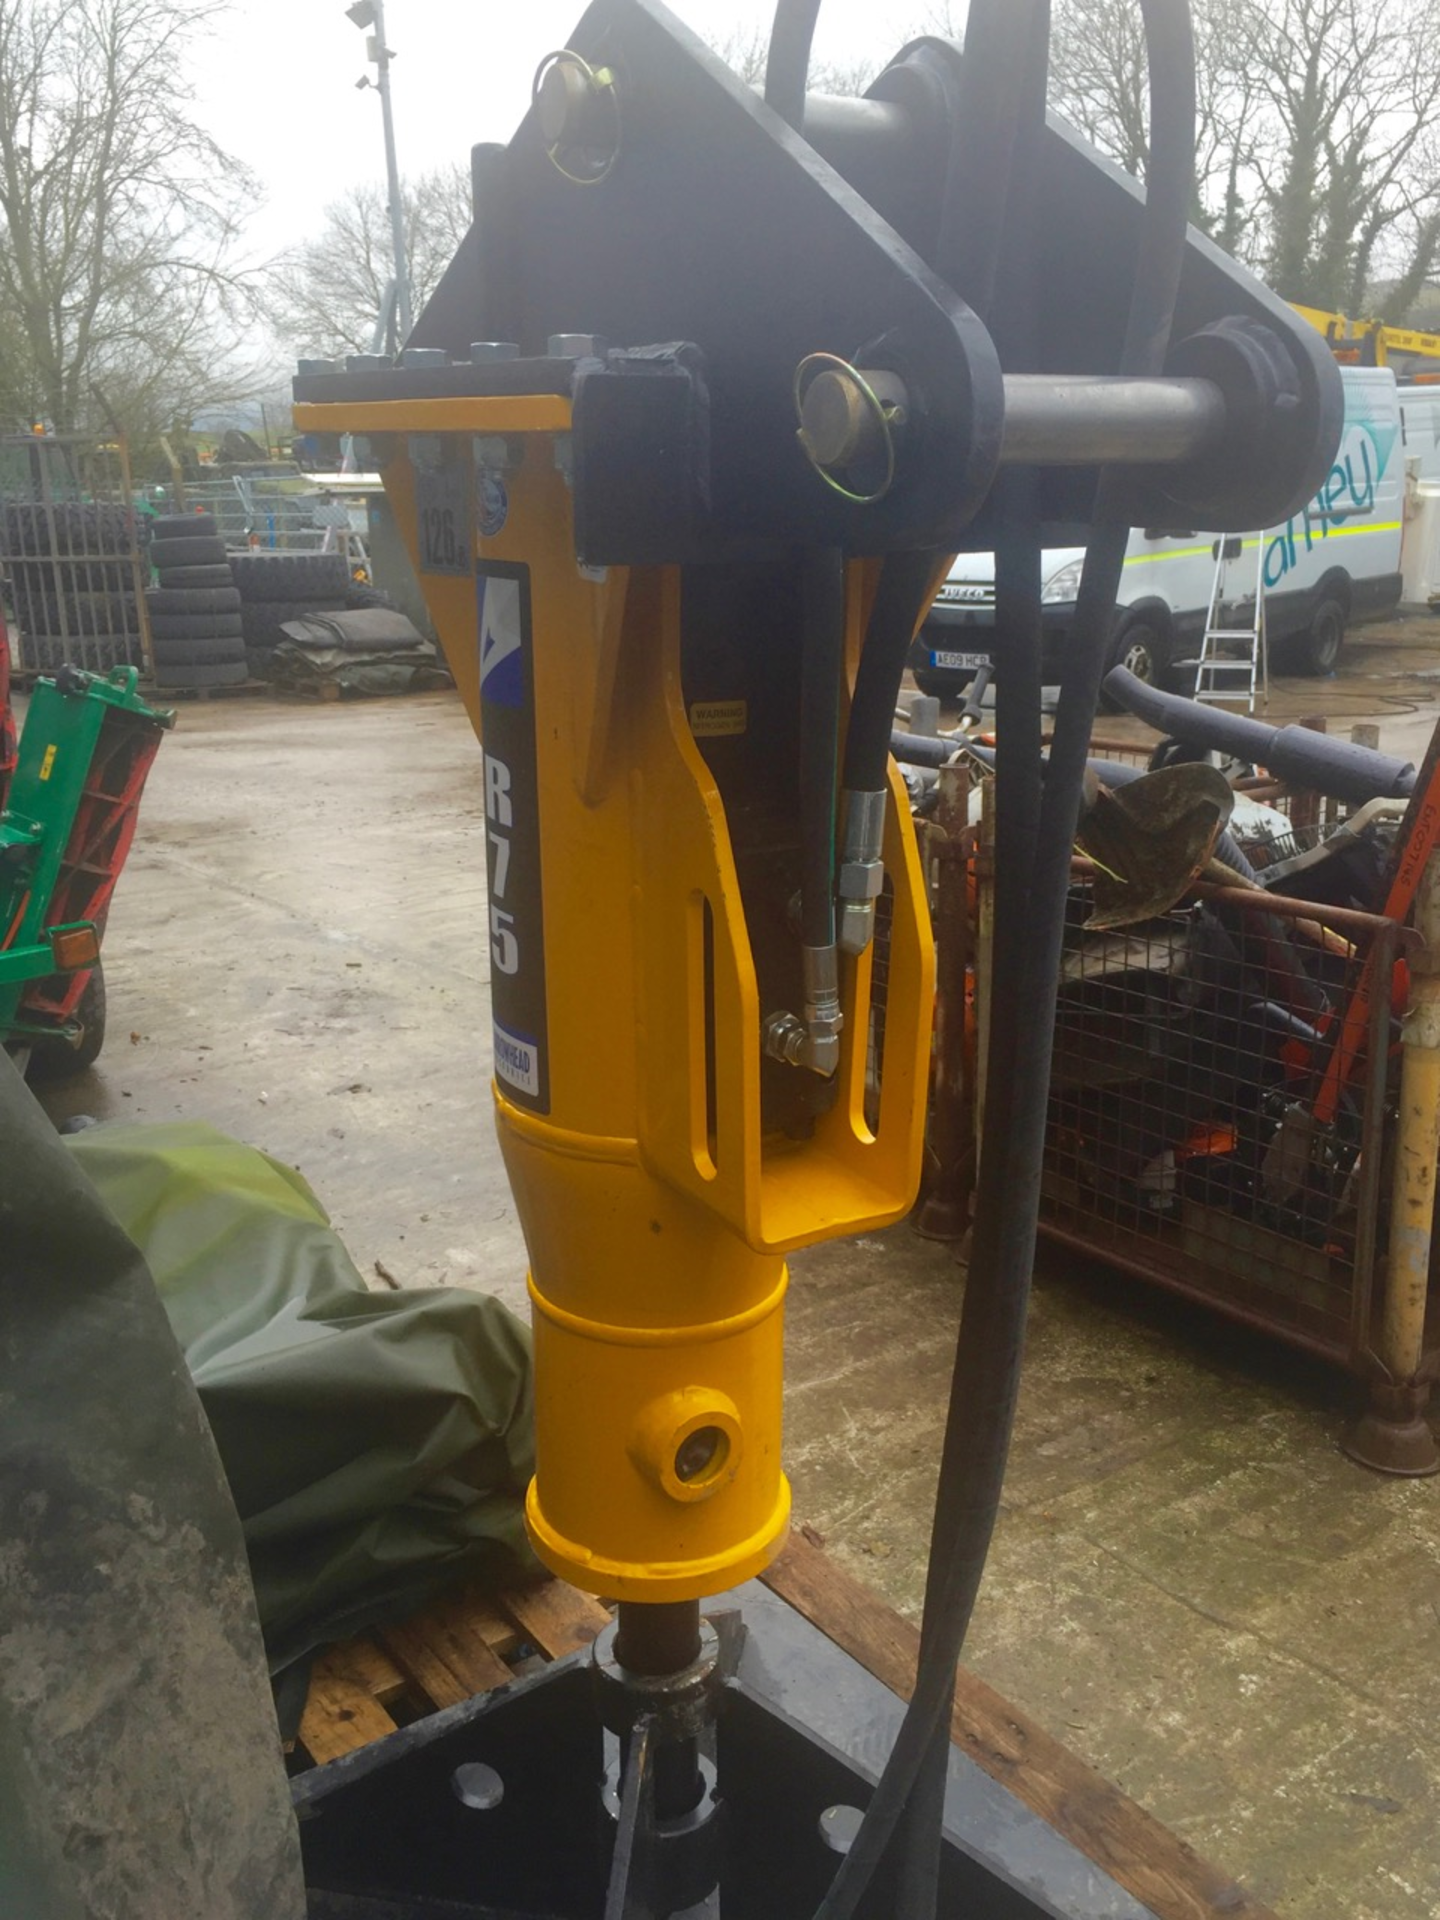 Arrowhead R75 hydraulic breaker Year: 2016 new and unused. UK made, includes 2 pin bracket, - Image 4 of 7